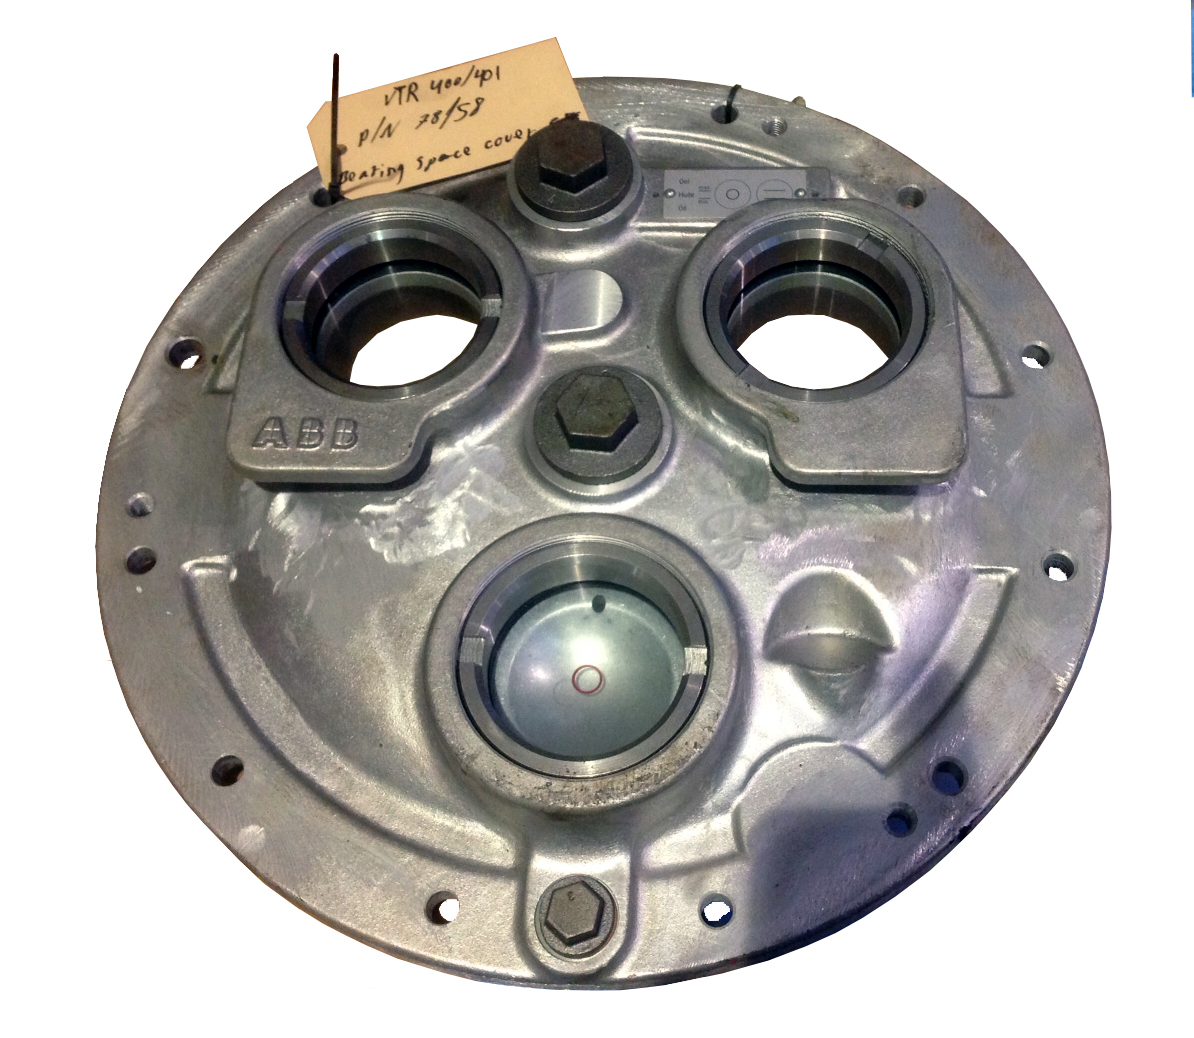 R400/1 Bearing space cover